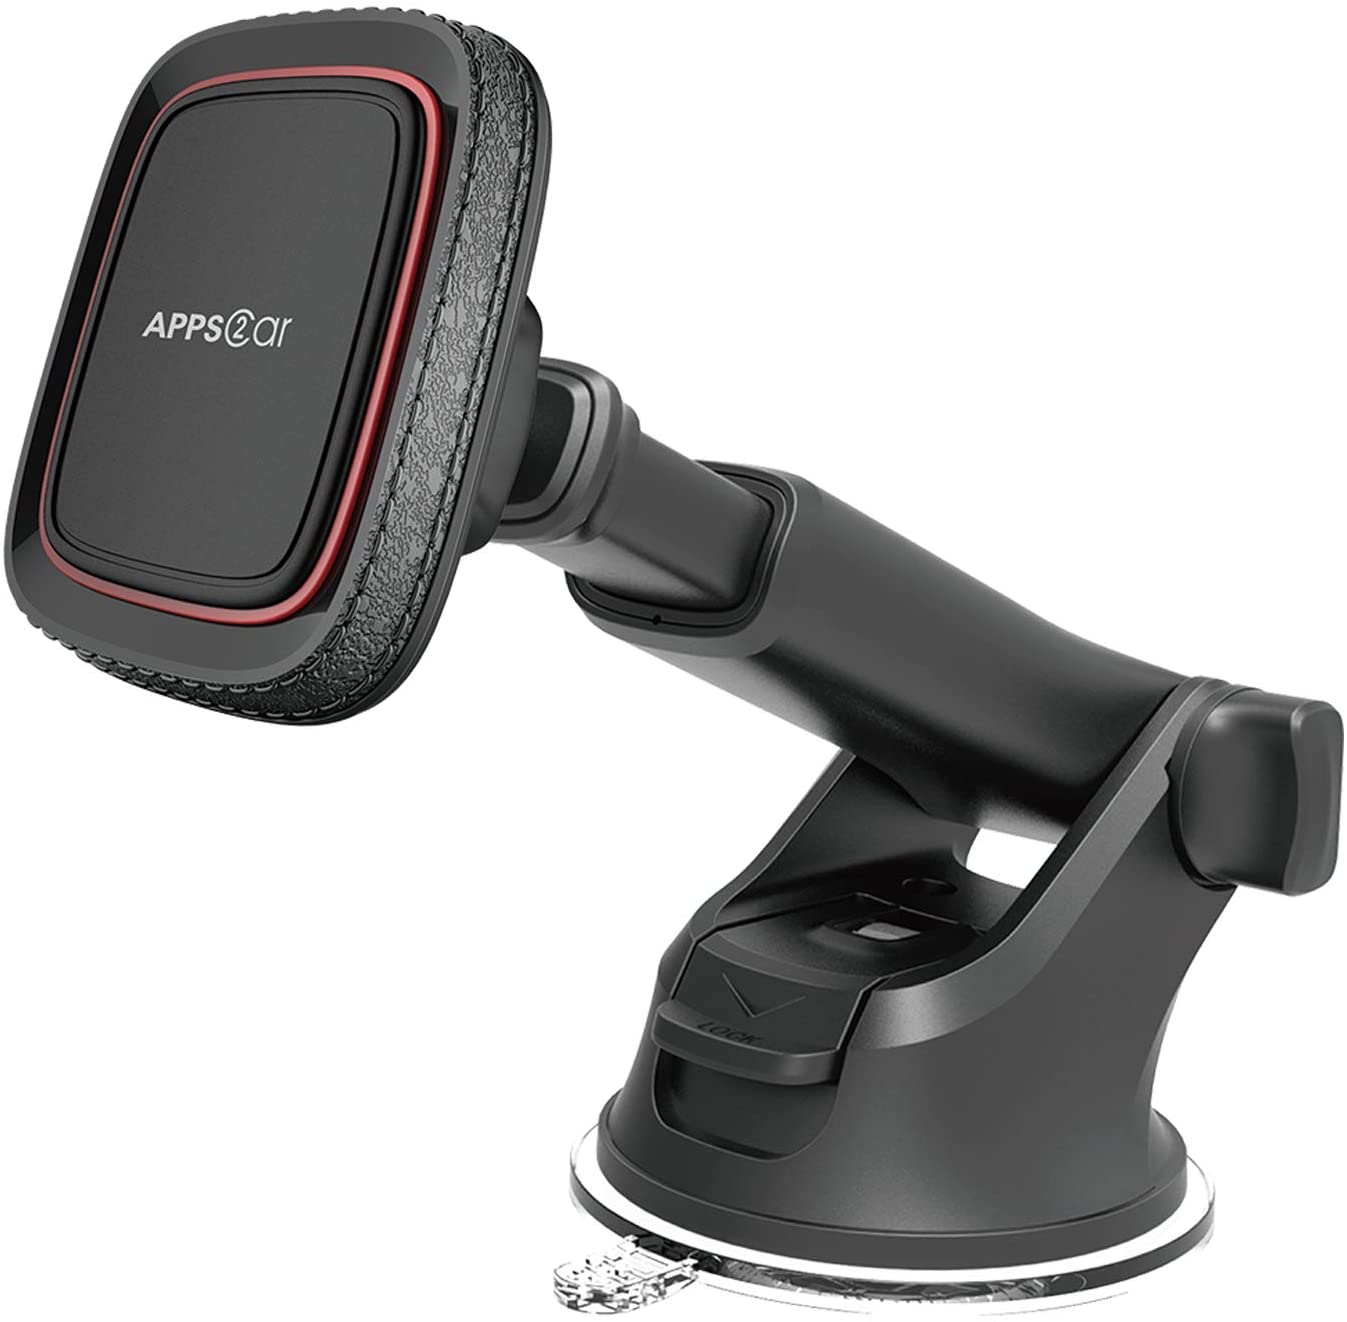 Apps2car Phone Mount Render Cropped